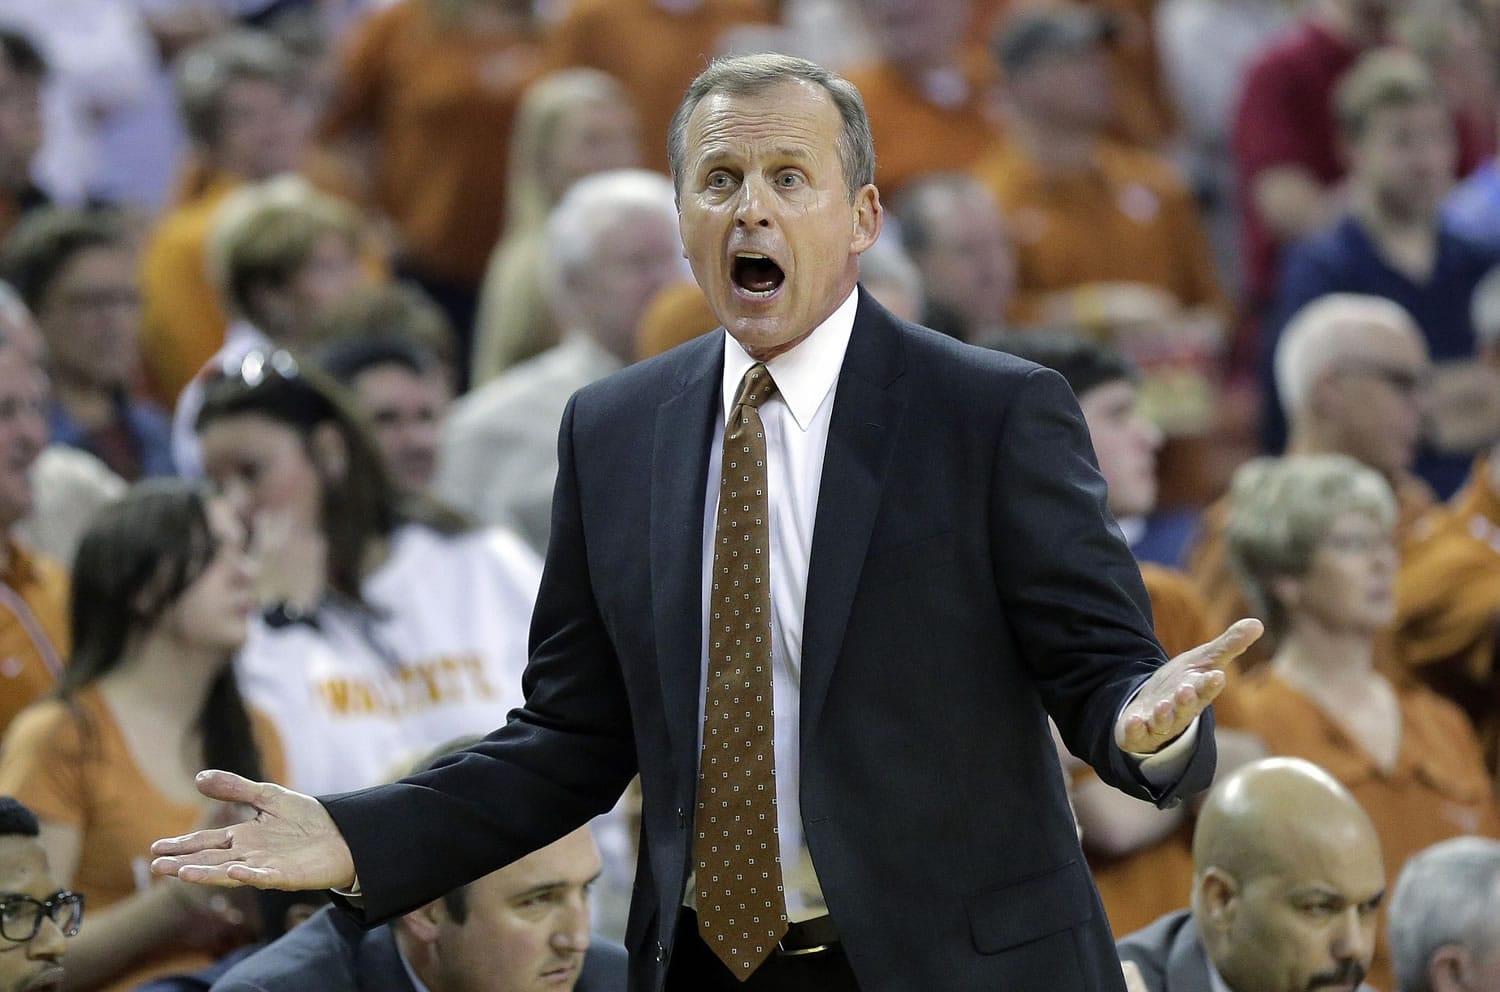 Coach Rick Barnes, who shaped Texas into a national basketball power with three Big 12 championships and 16 NCAA Tournament appearances in 17 years, will be released after yet another quick exit from the postseason, people with knowledge of the decision told The Associated Press on Saturday, March 28, 2015.